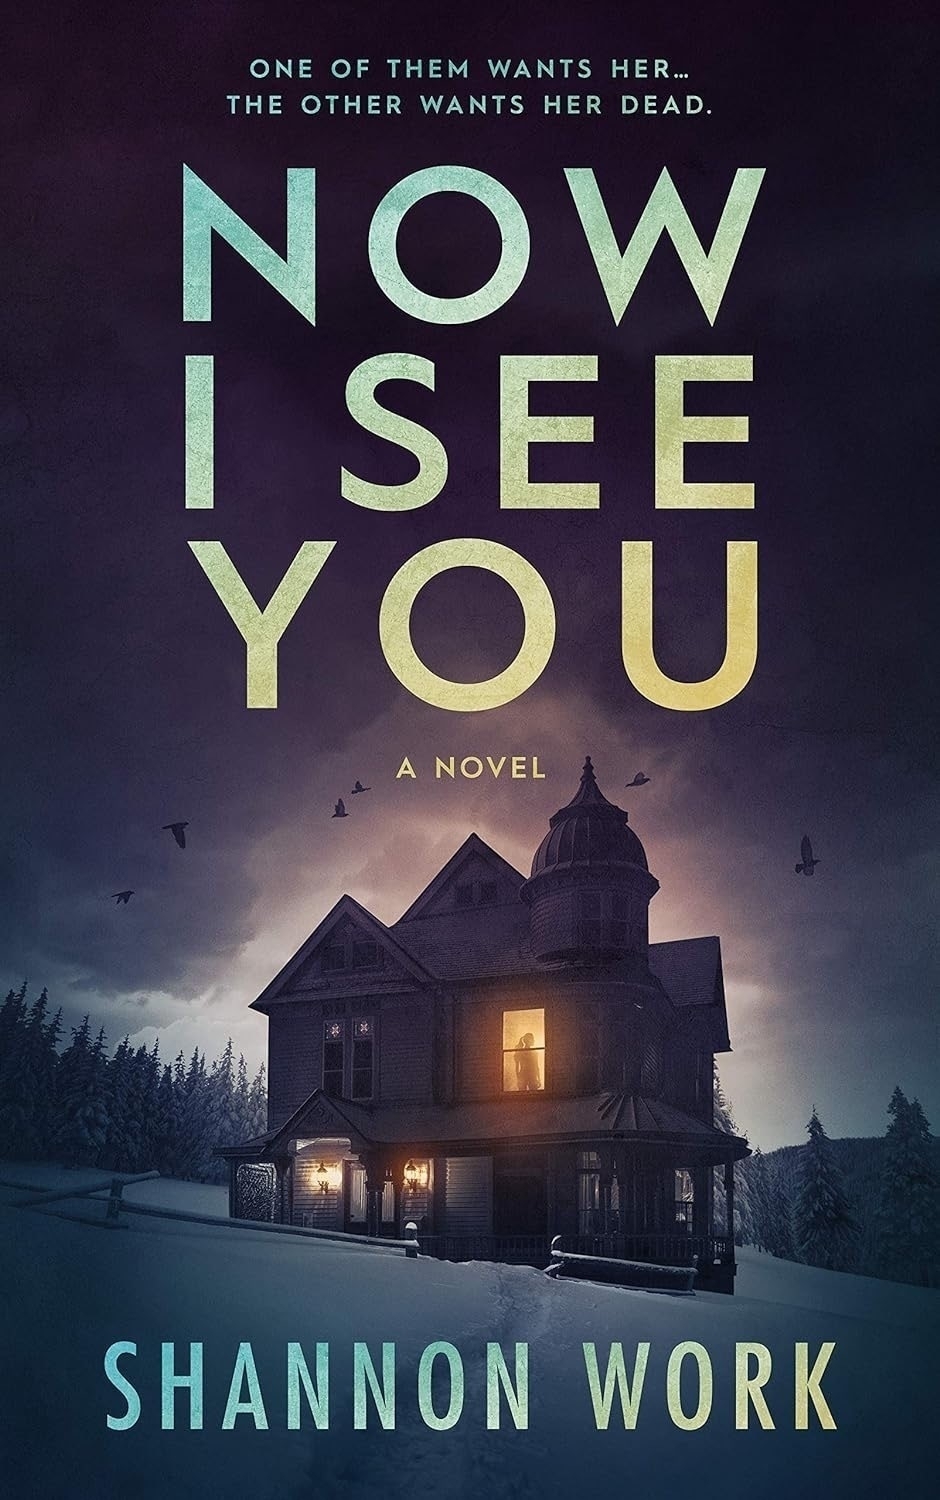 Book cover: Now I see you.